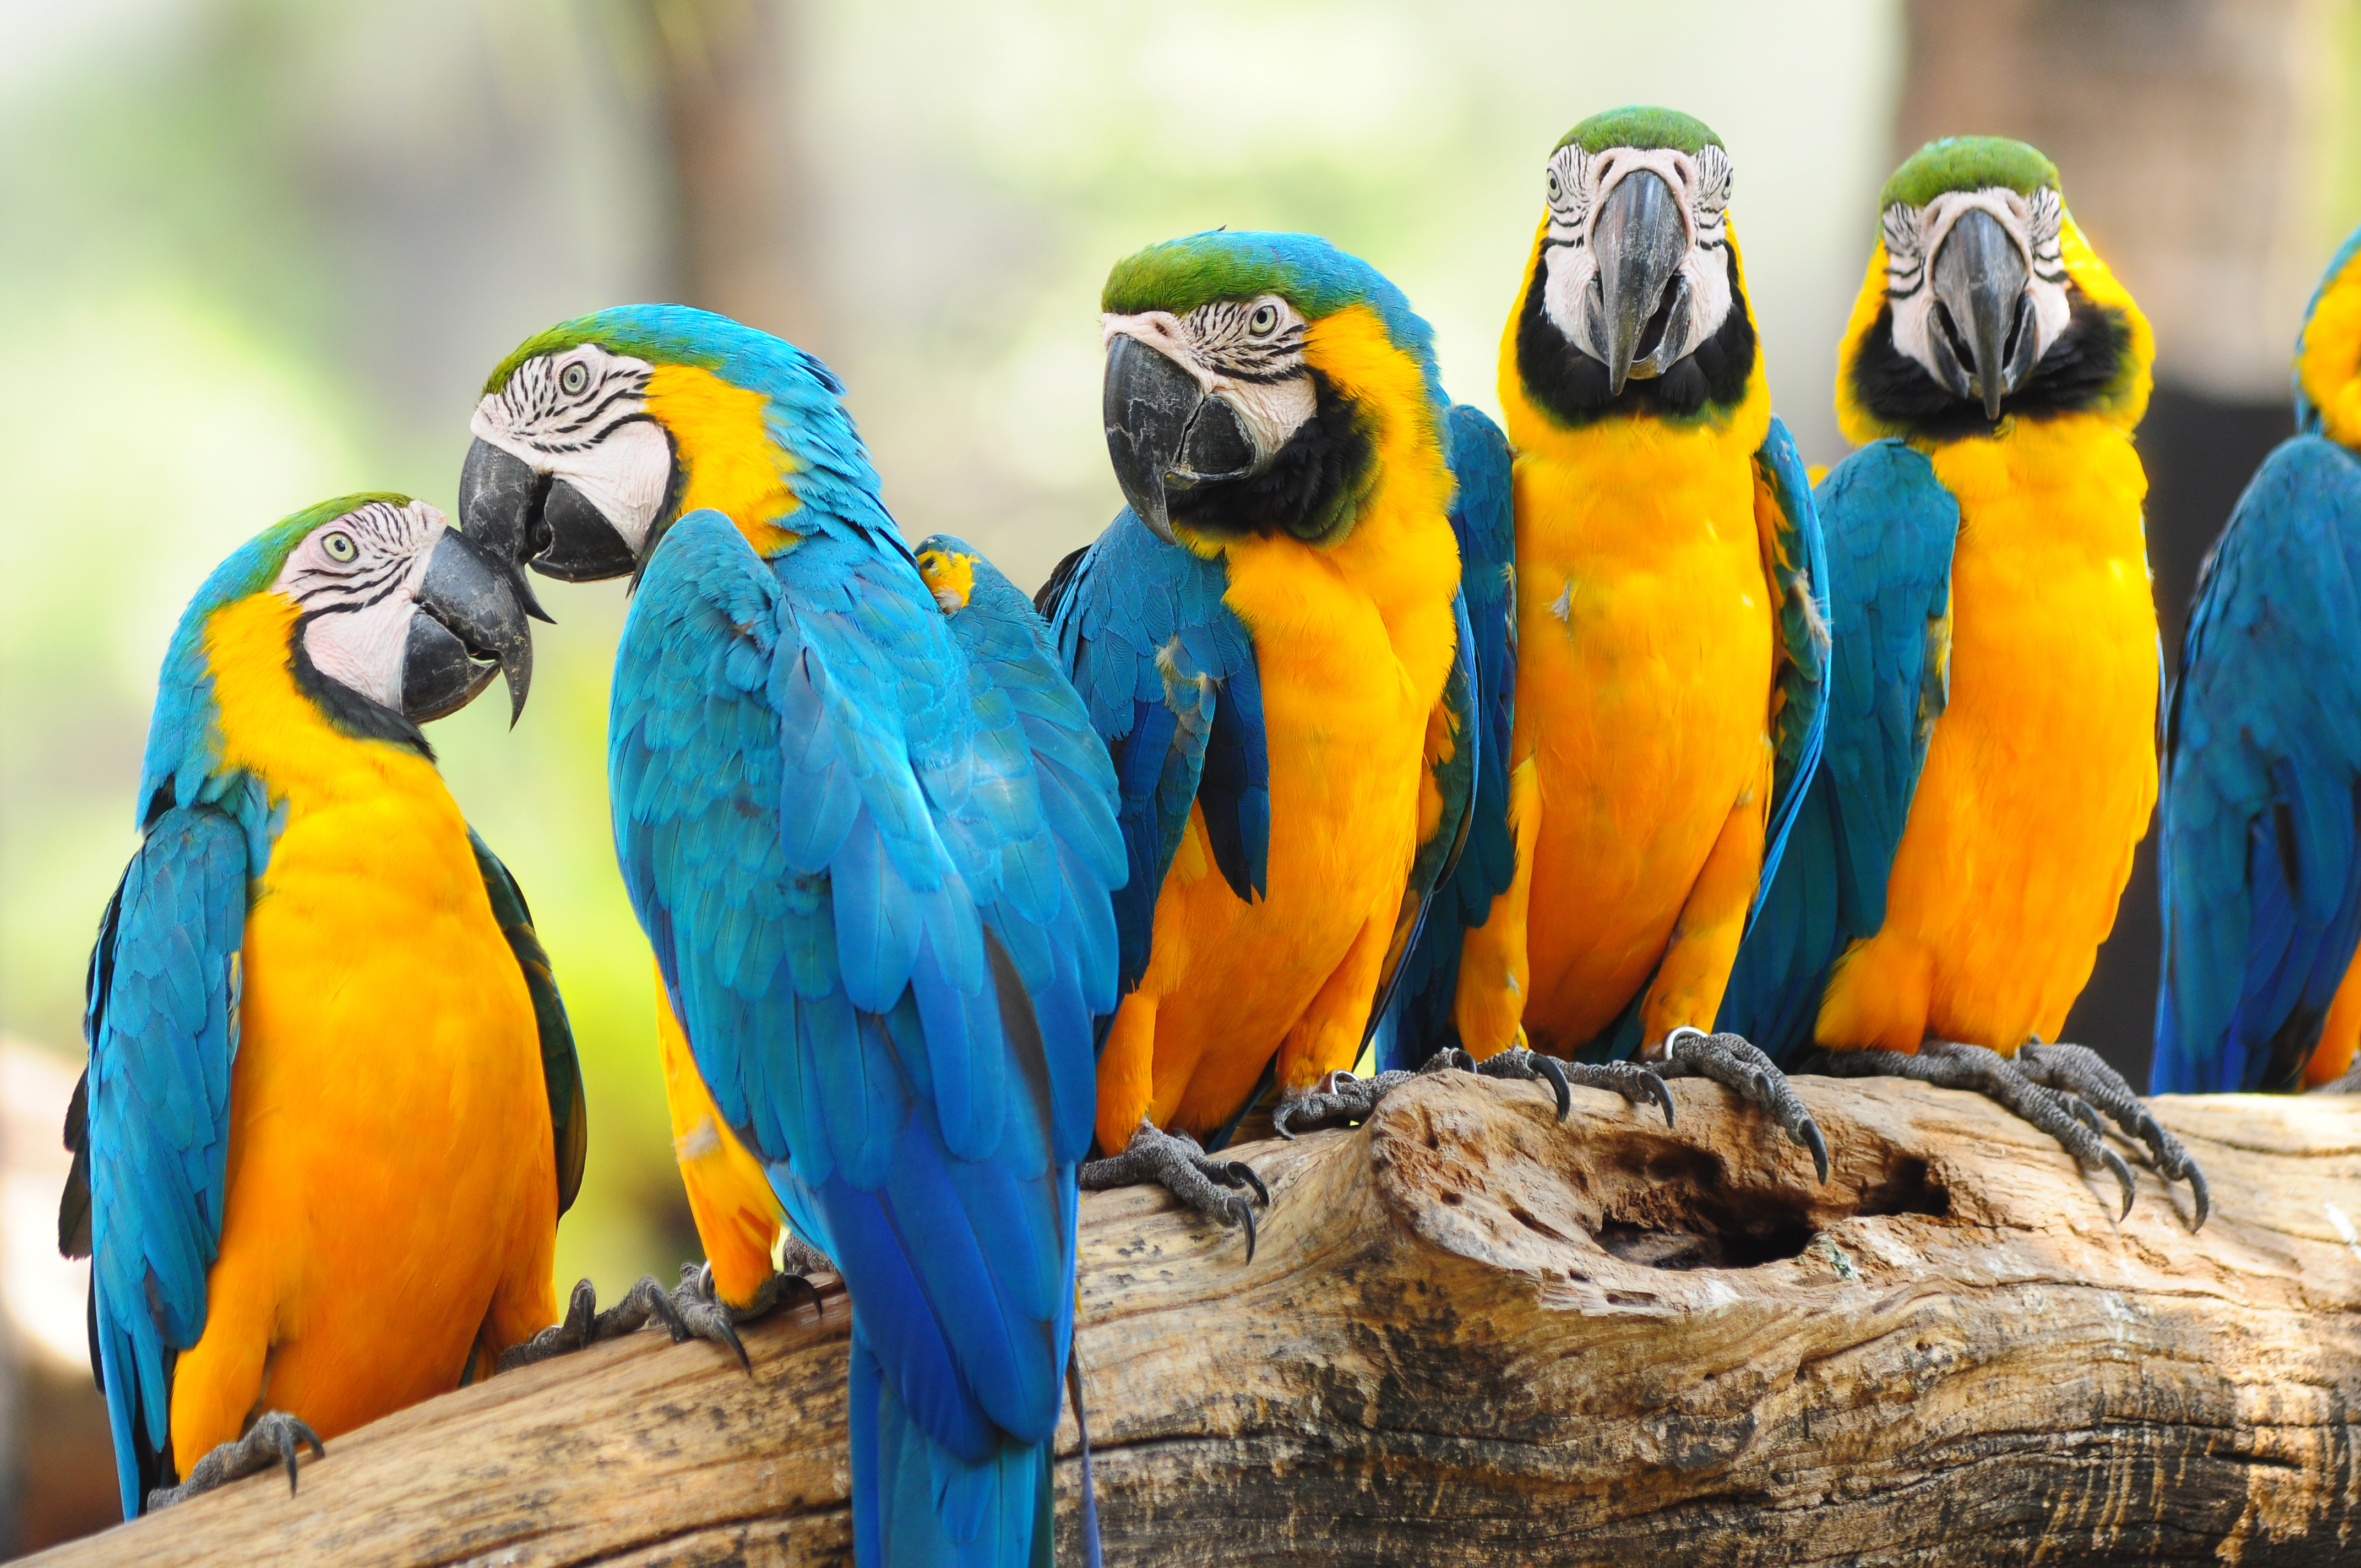 Download wallpapers 4k, Macaw, zoo, parrots, branch, colorful parrots, Ara  for desktop with resolution 3840x2400. High Quality HD pictures wallpapers